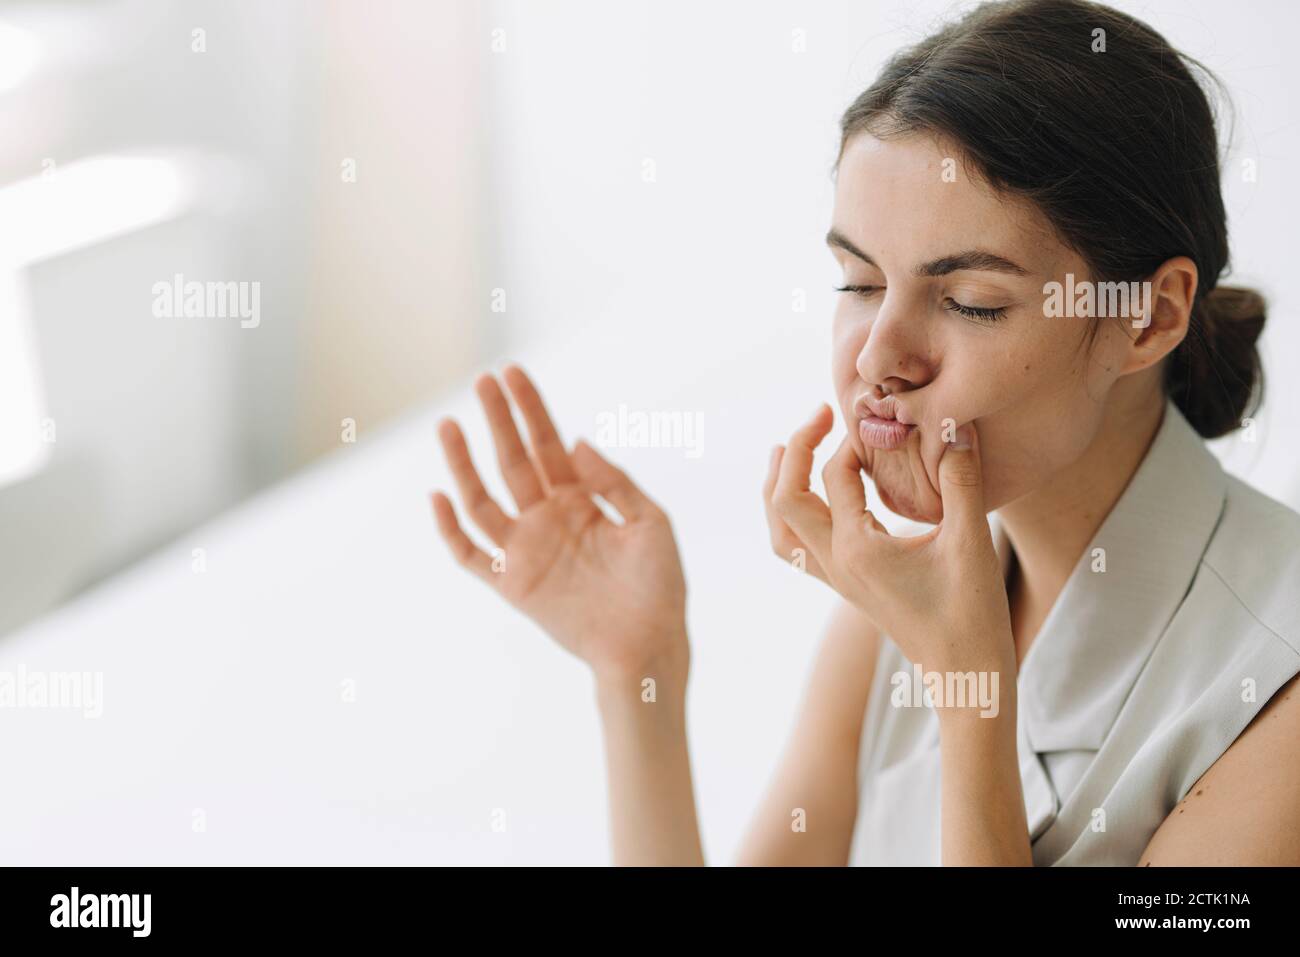 Playful woman making faces while sitting at office Stock Photo